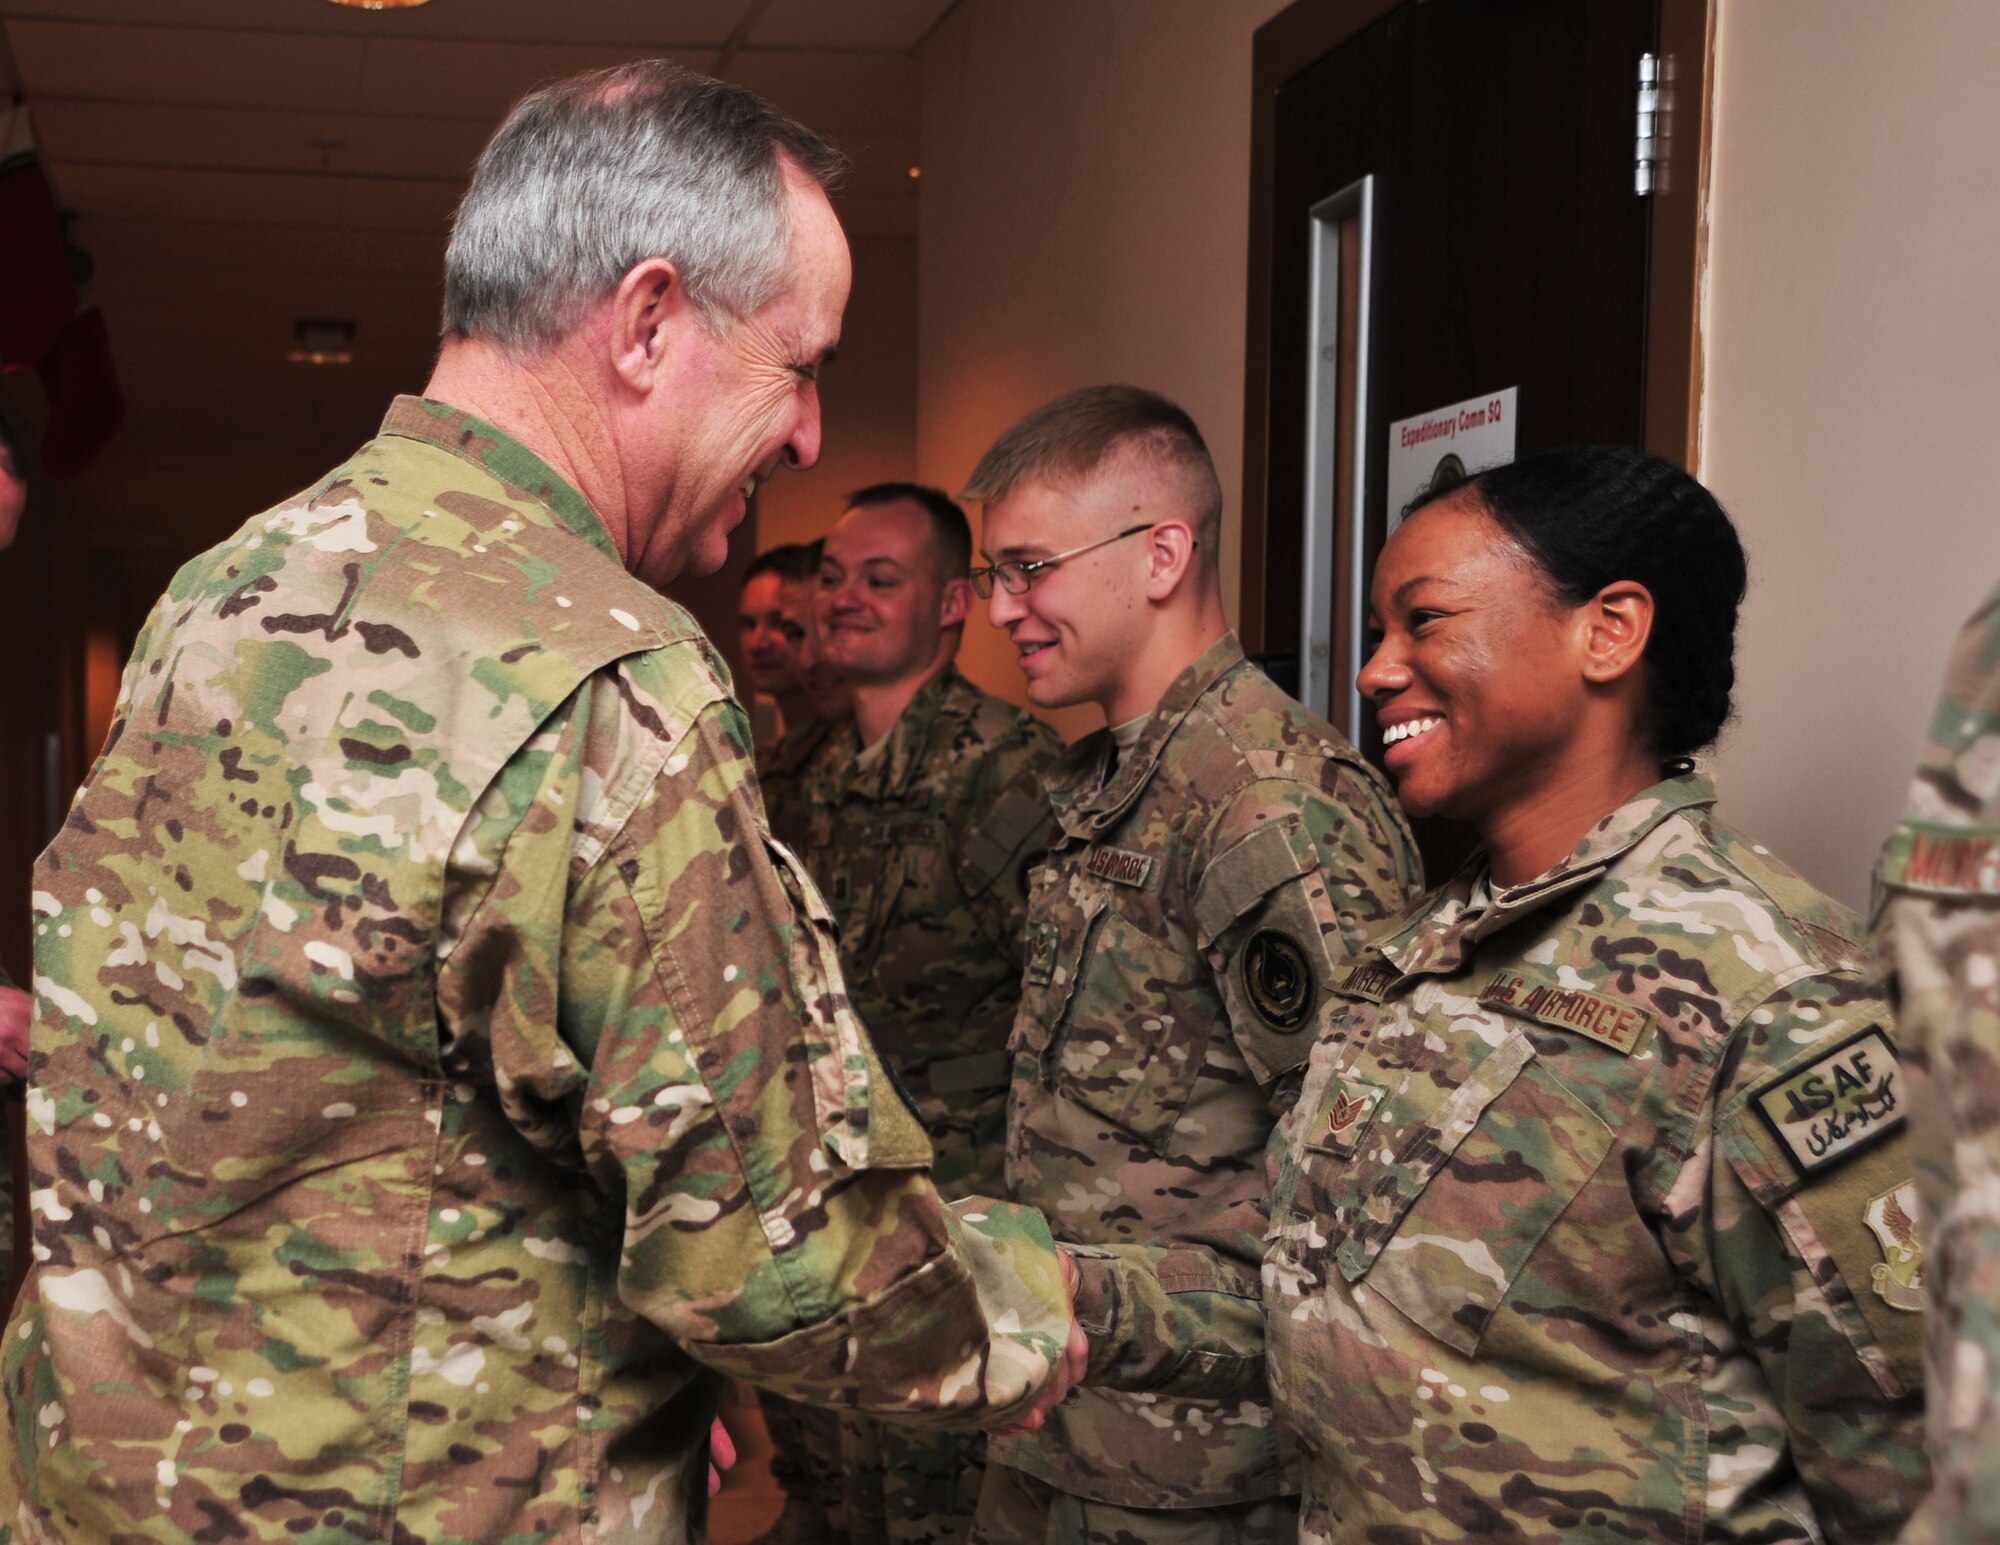 U.S. Air Force Chief of Staff Gen. Mark A. Welsh III shakes hands with U.S. Air Force Tech. Sgt. Delora Moorer, 455th Air Expeditionary Wing command chief executive assistant, after he recognized the Airman Dec. 15, 2014 at Bagram Airfield, Afghanistan. Welsh spent a portion of his visit to the Air Forces Central Command area of responsibility engaging with airmen, NCOs and officers during an Airman’s Call. (U.S. Air Force photo by Staff Sgt. Whitney Amstutz/released) 